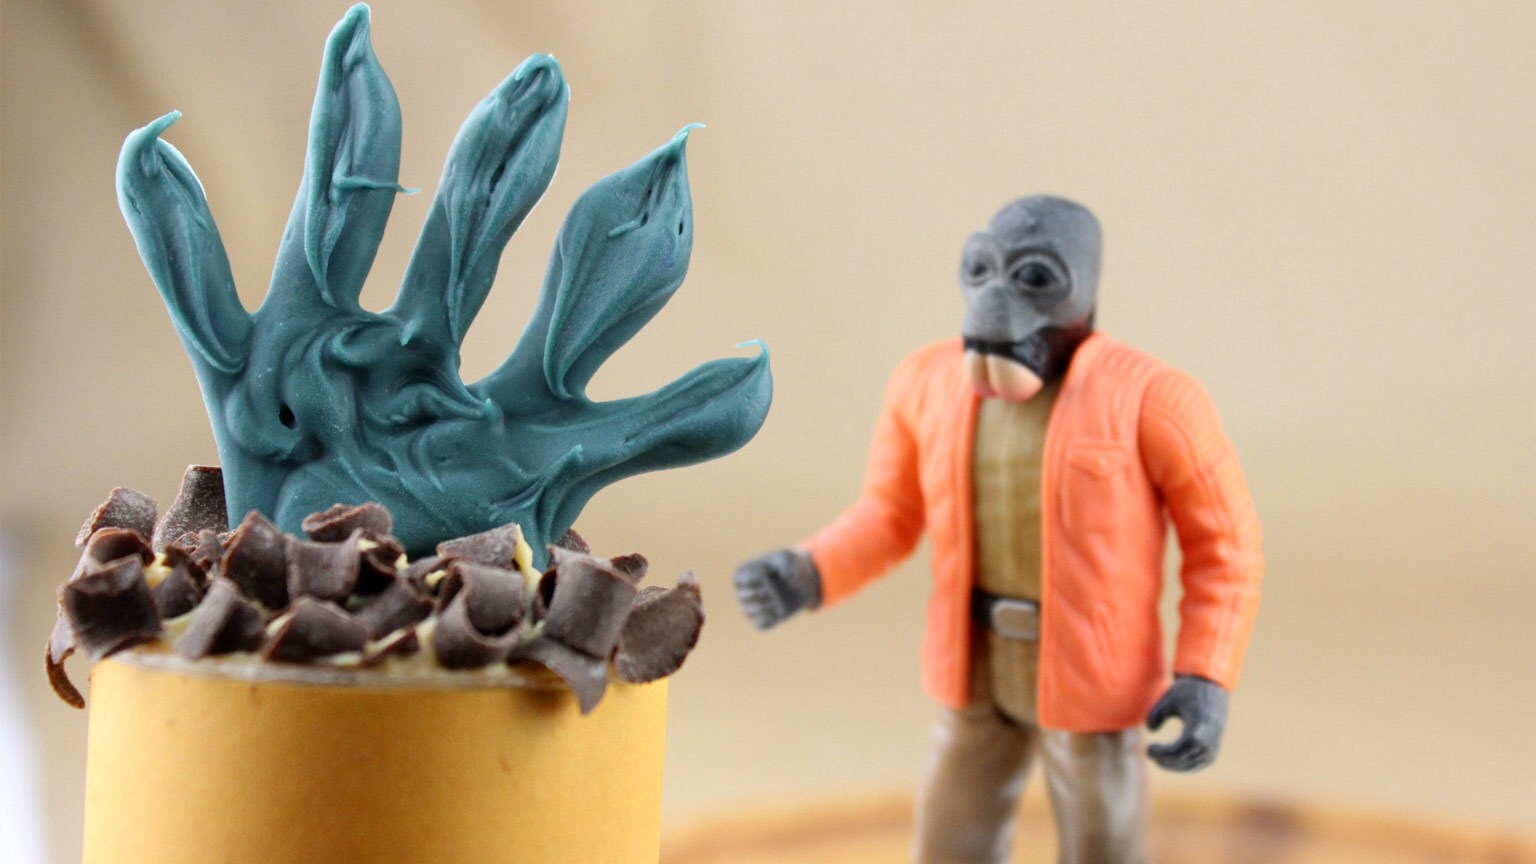 Give Your Tastebuds a Hand This Halloween with These Ponda Baba Arm Pops